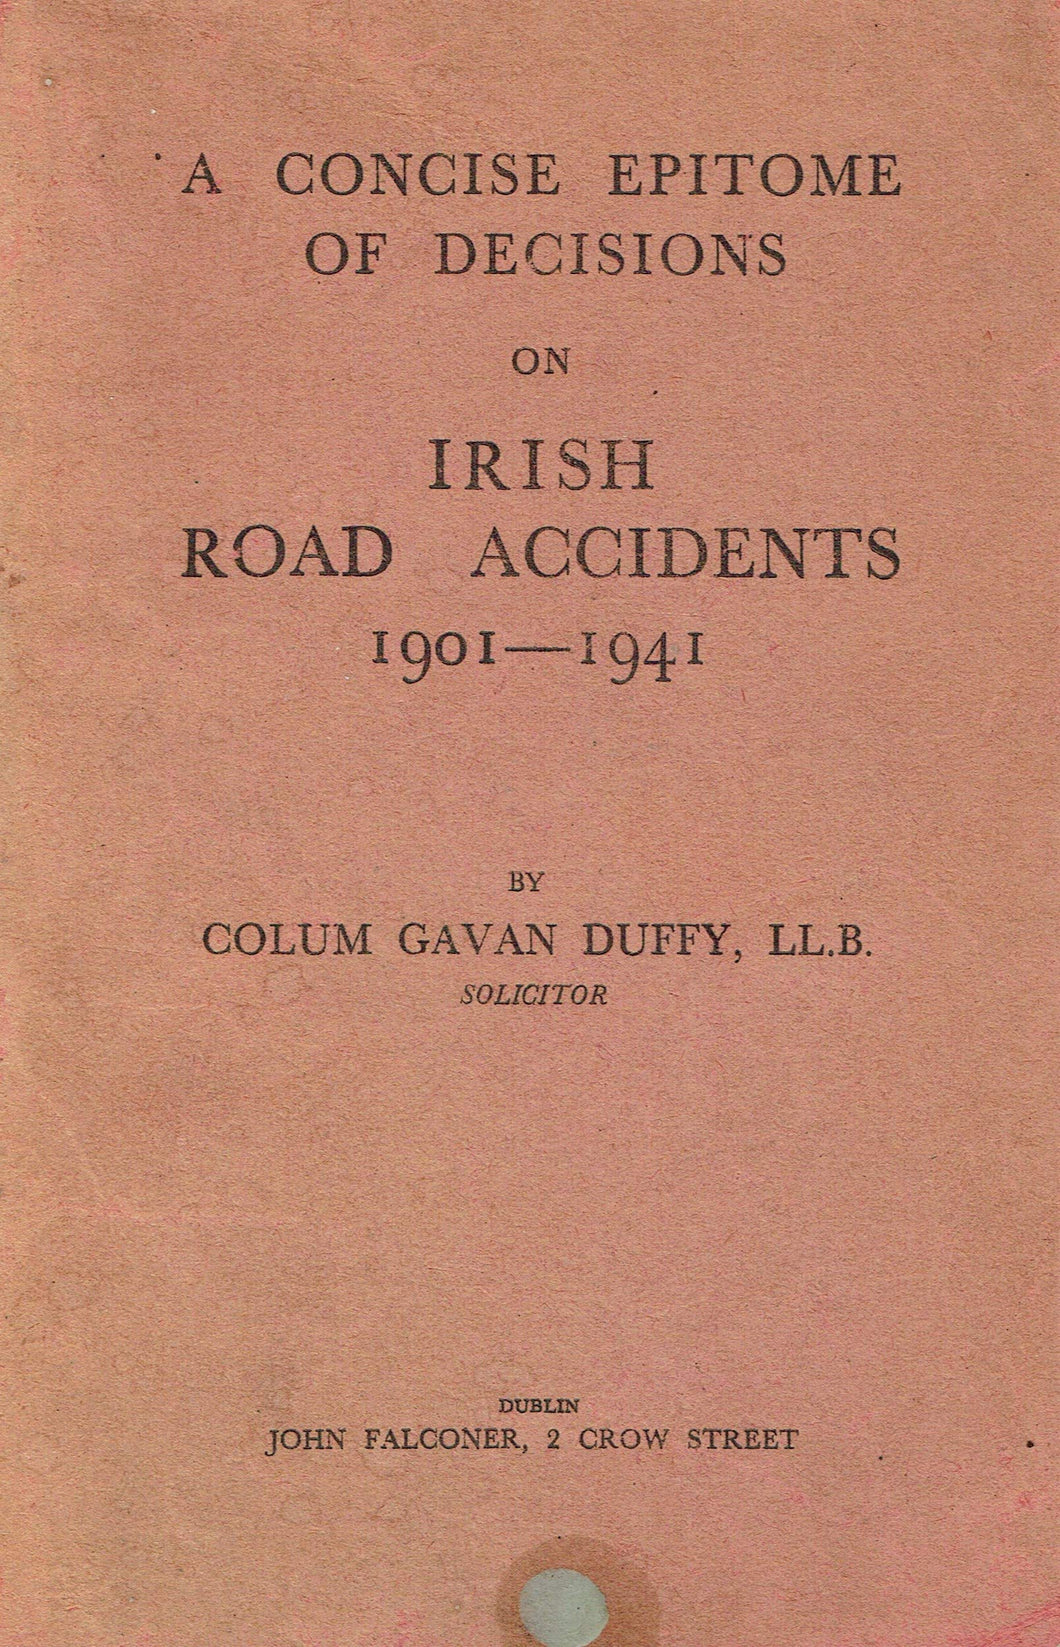 A chapter of accidents: Being a concise epitome of all the reported decisions on road accident cases in the Irish courts from 1901 to 1941 (both inclusive) together with a detailed analytical index